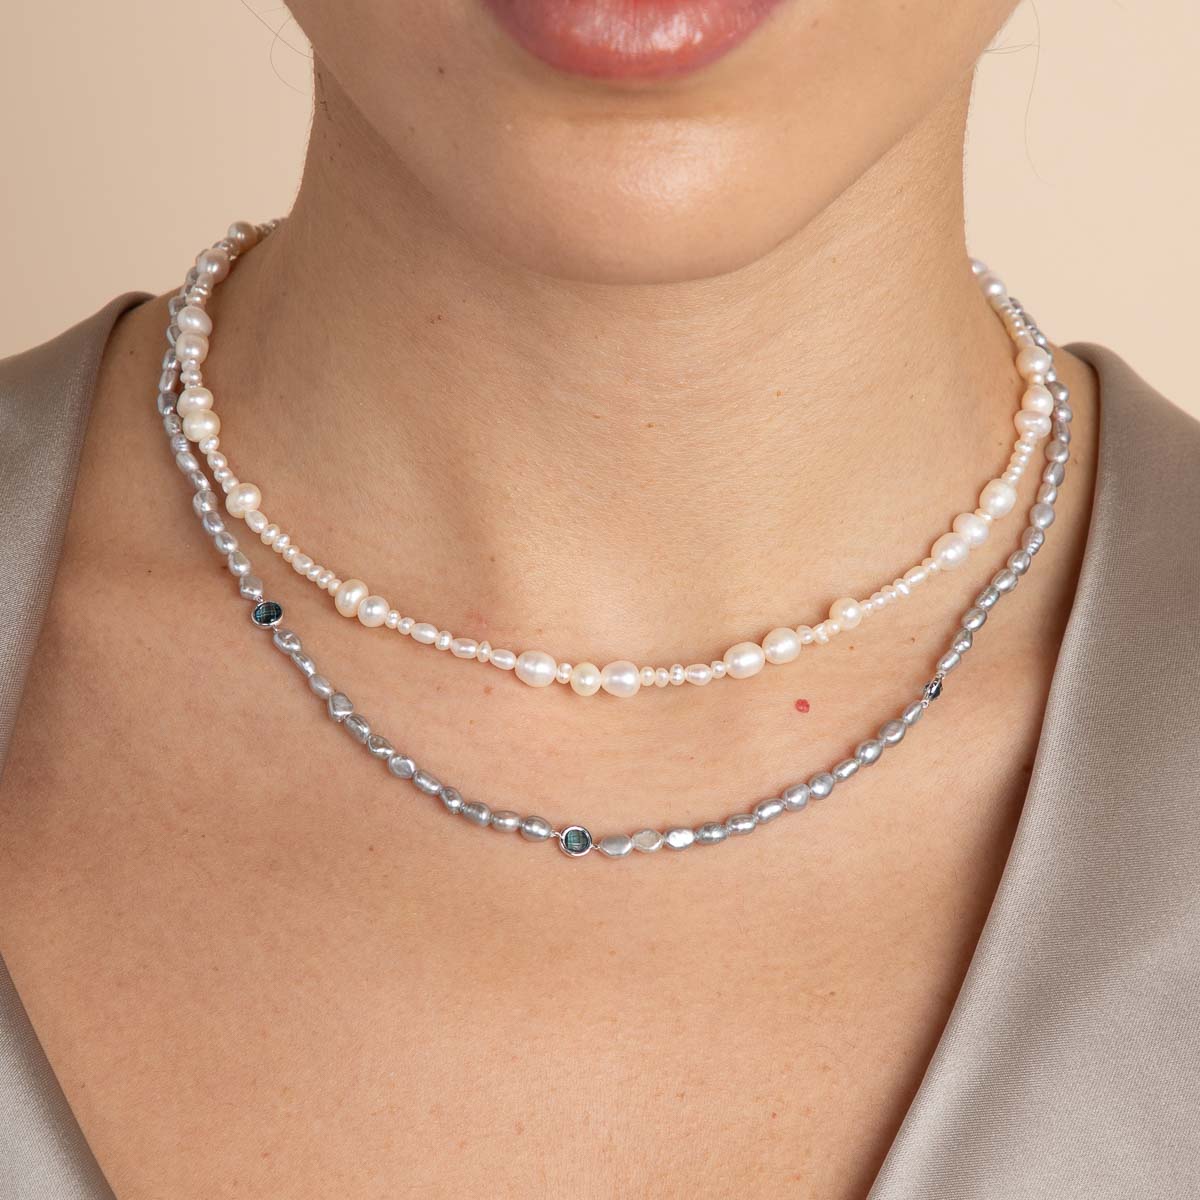 Tranquility Pearl Beaded Necklace in Silver